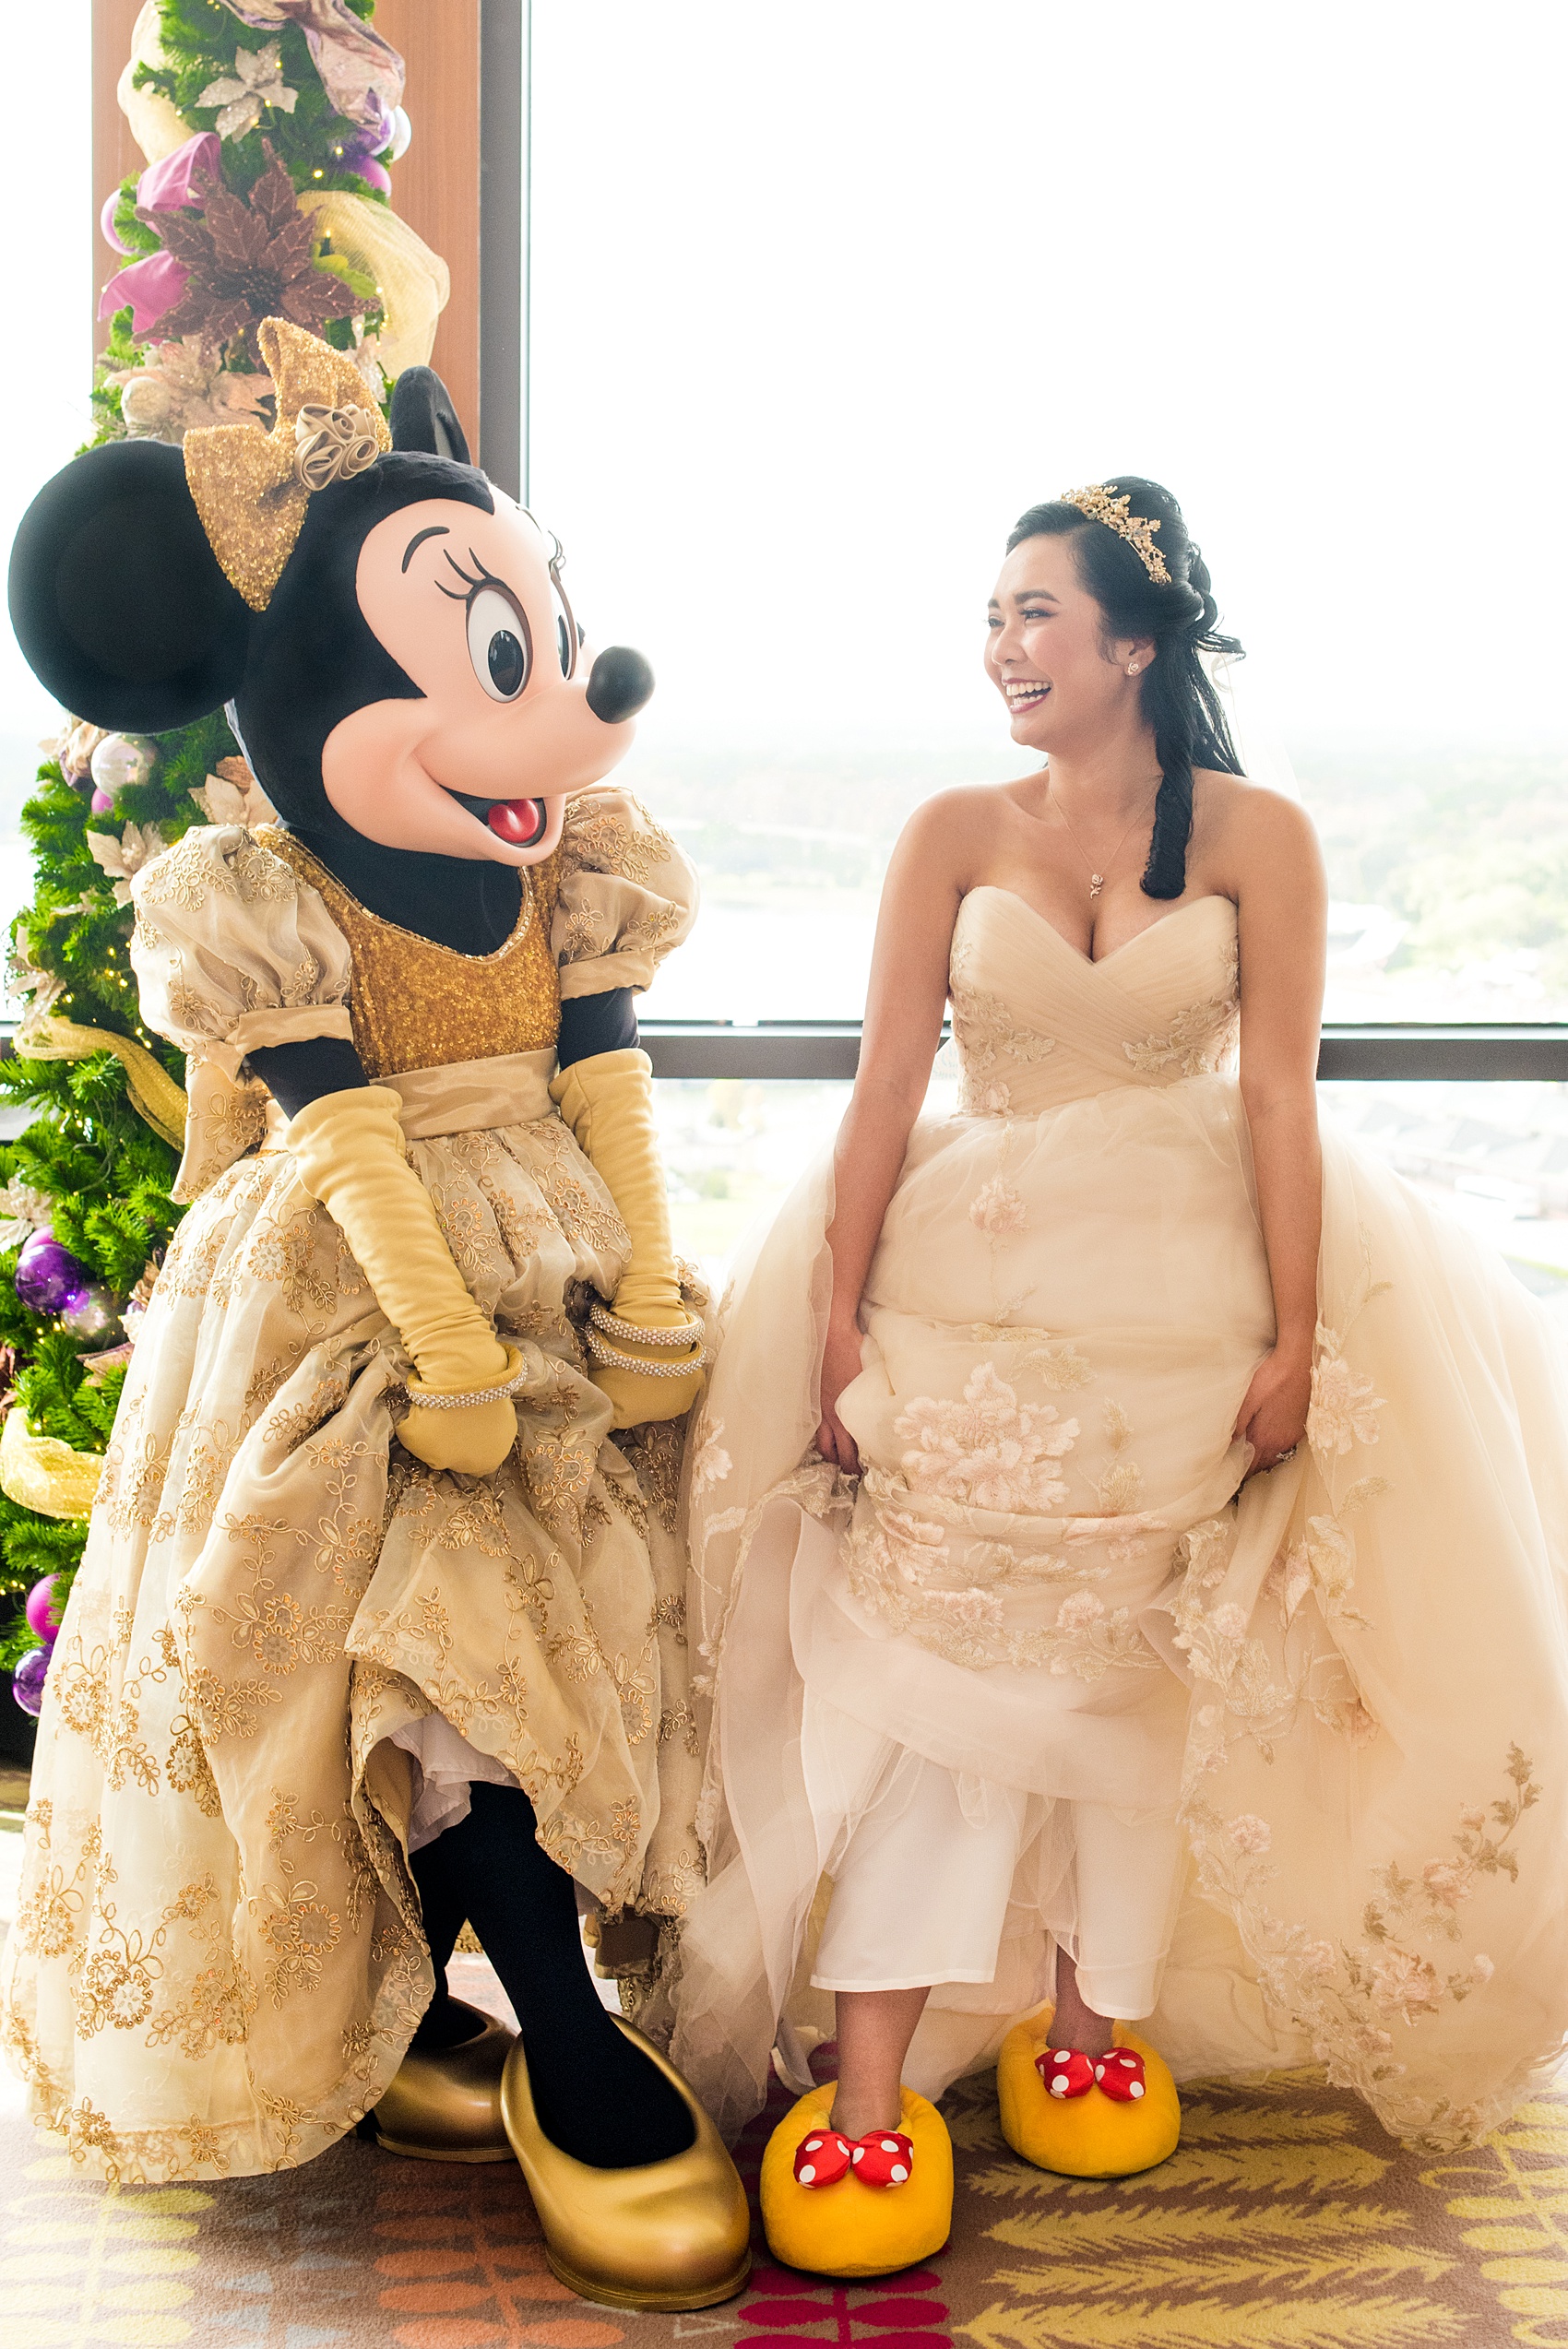 Photographs of a Walt Disney World wedding by Mikkel Paige Photography. The bride wore matching Minnie Mouse slippers to get ready and their photographer had the idea to do a cute Minnie Mouse and Bride matching shoe picture! The reception venue at The Contemporary Resort’s California Grill was great for fun, awesome photos with them. Their small, dream day overlooked the Magic Kingdom Park and Cinderella Castle! #disneywedding #DisneyWorldWedding #MinnieMouse